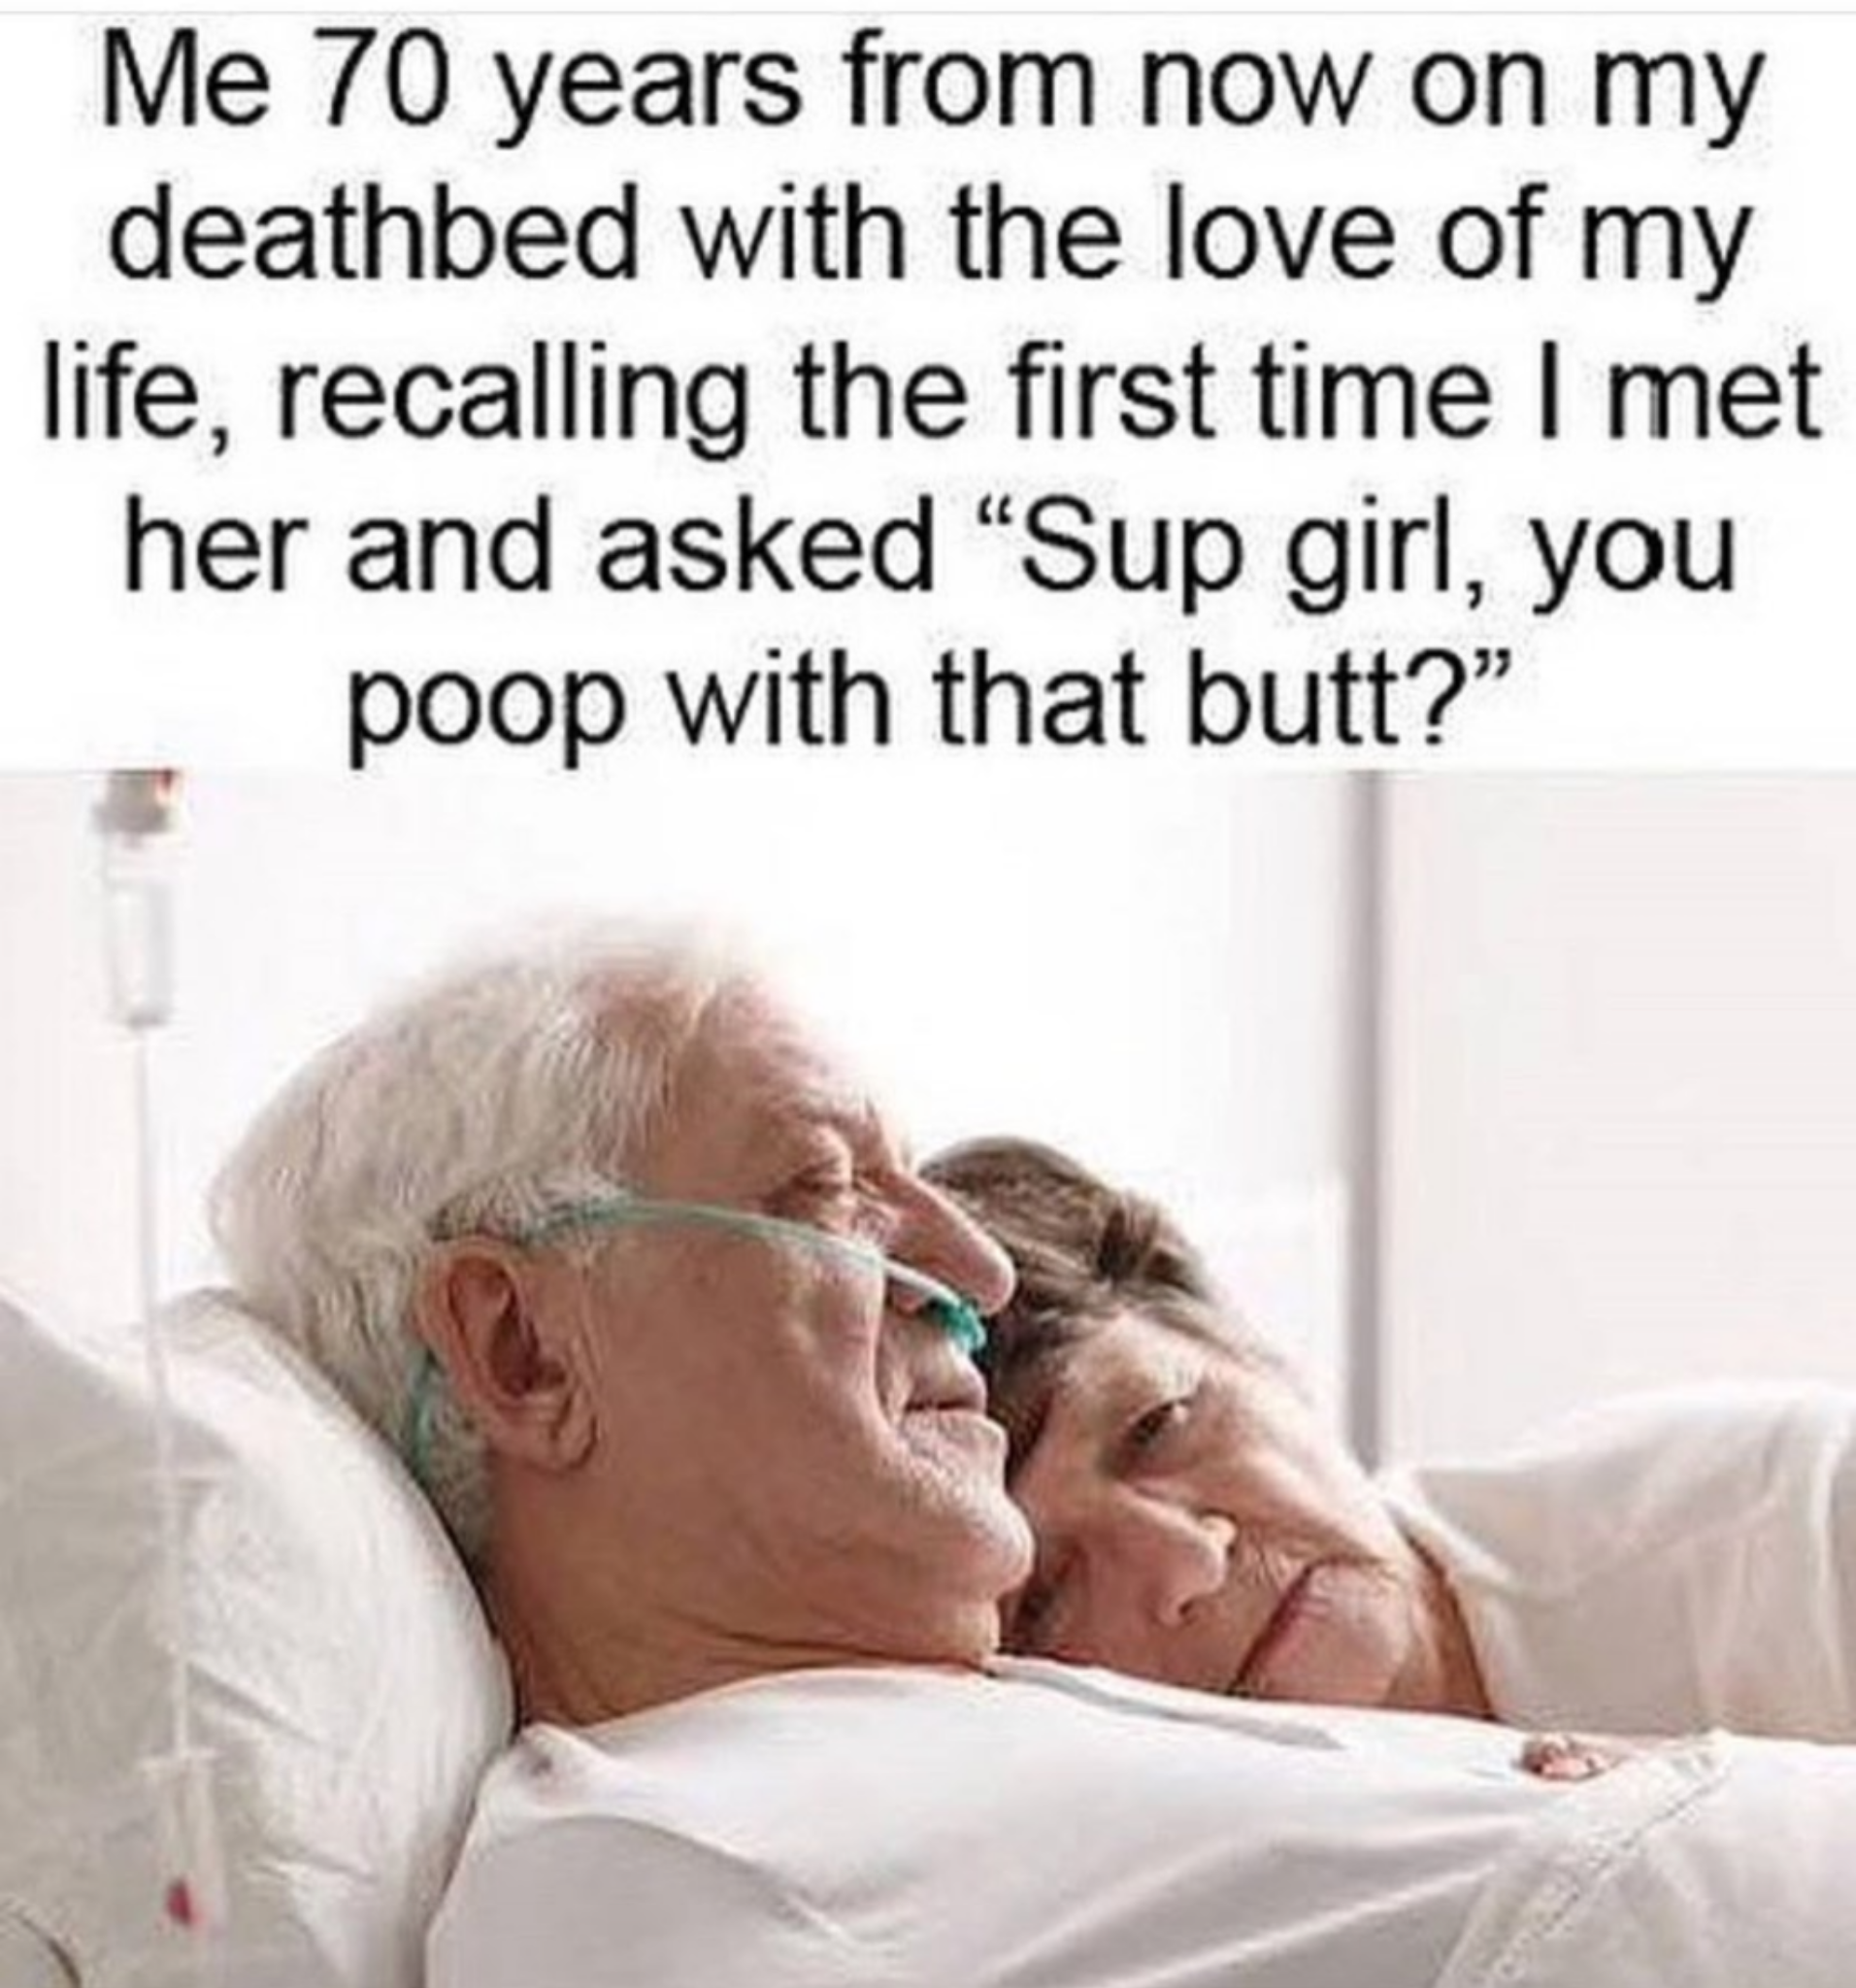 man on a deathbed - Me 70 years from now on my deathbed with the love of my life, recalling the first time I met her and asked Sup girl, you poop with that butt?"